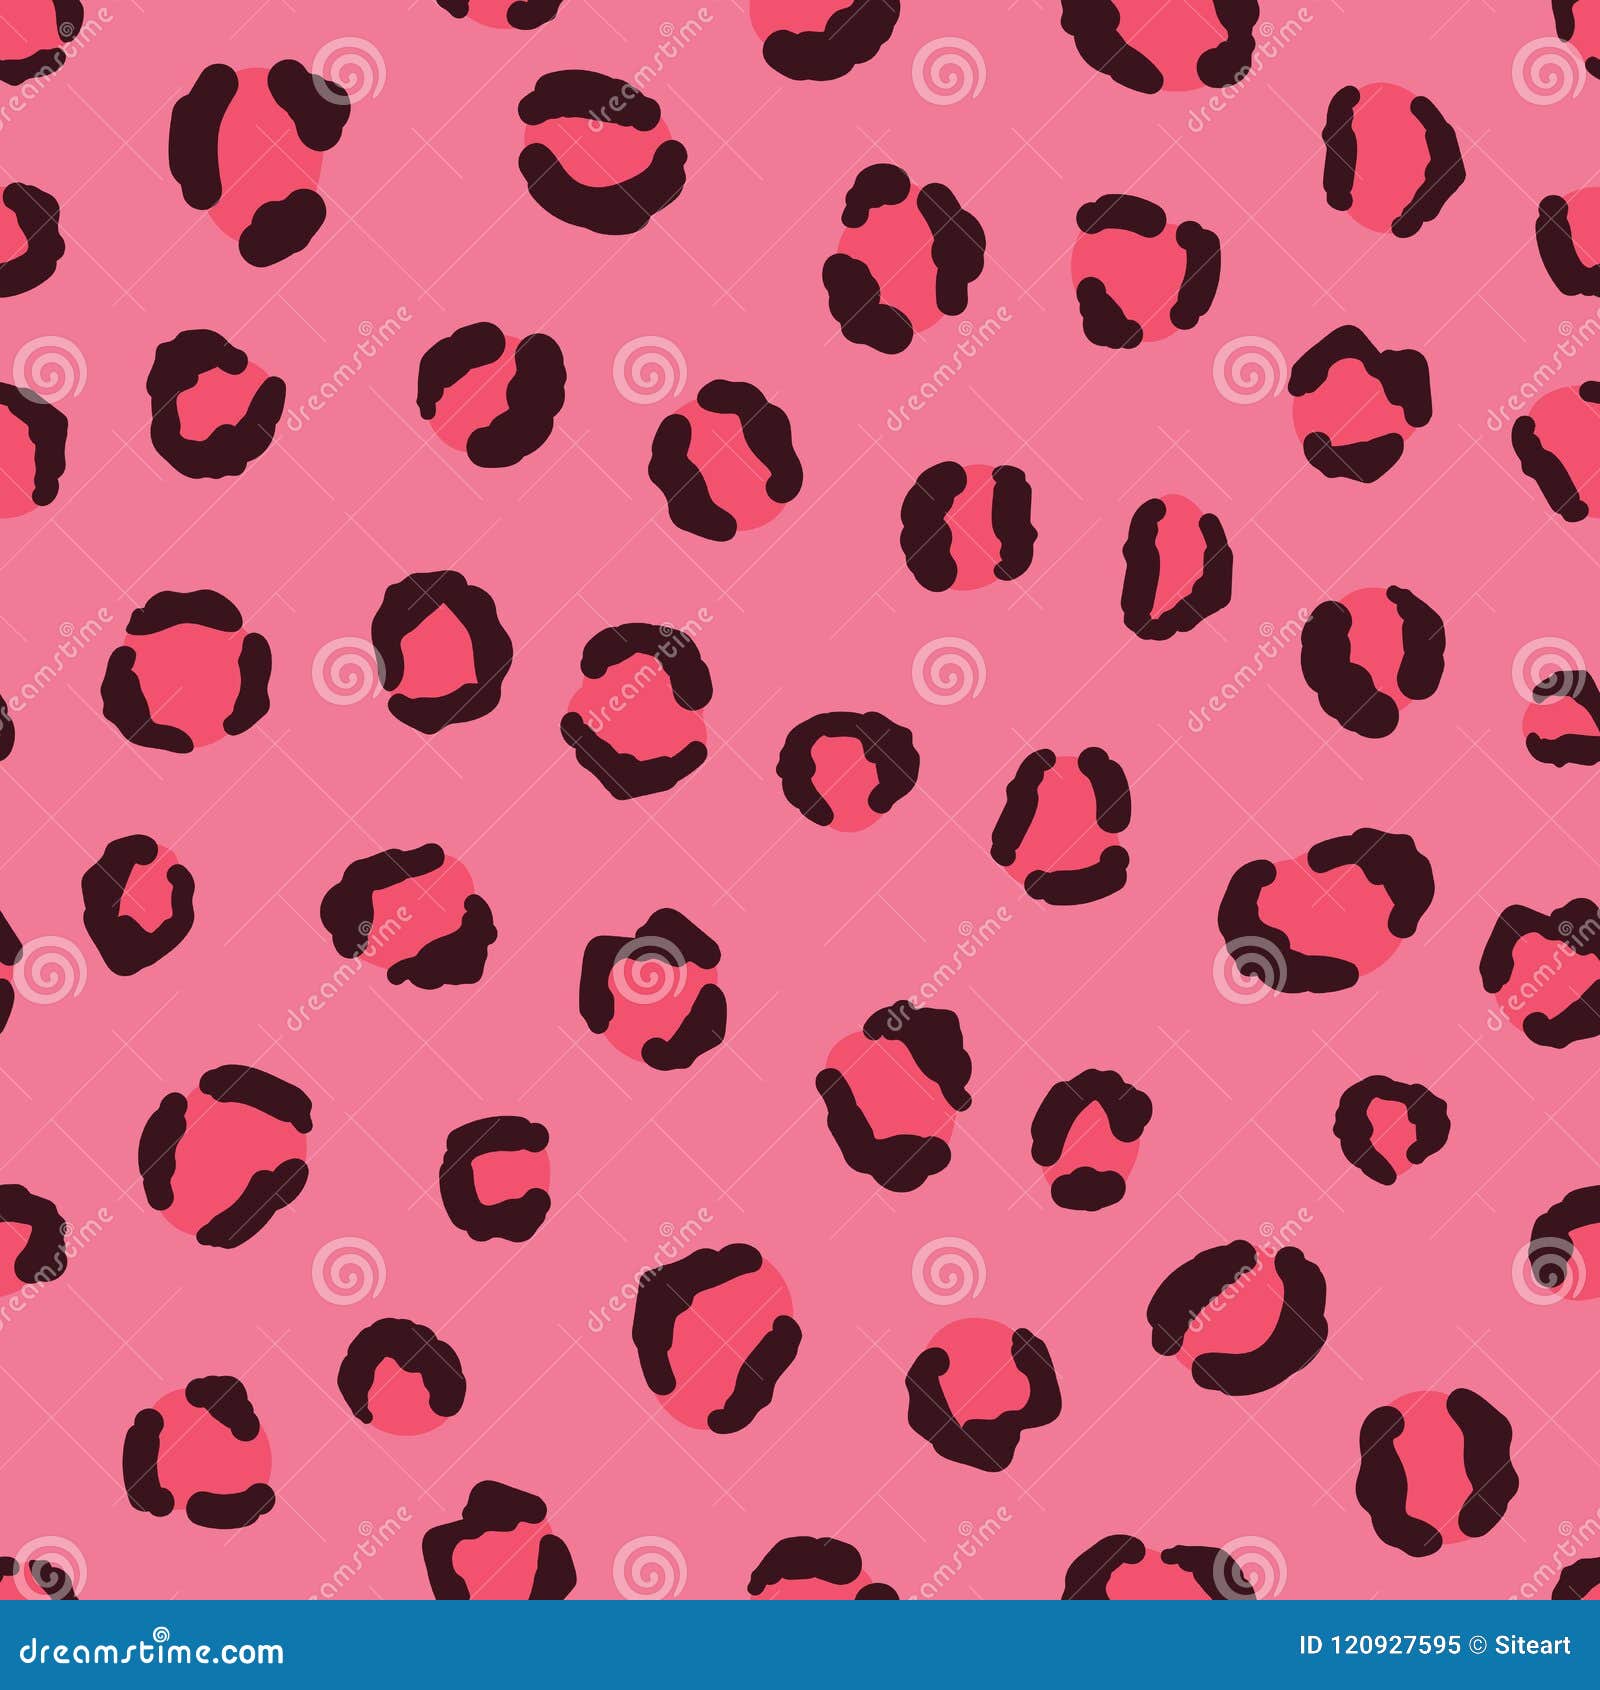 Hand-drawn Pink Seamless Leopard Pattern Stock Vector - Illustration of ...